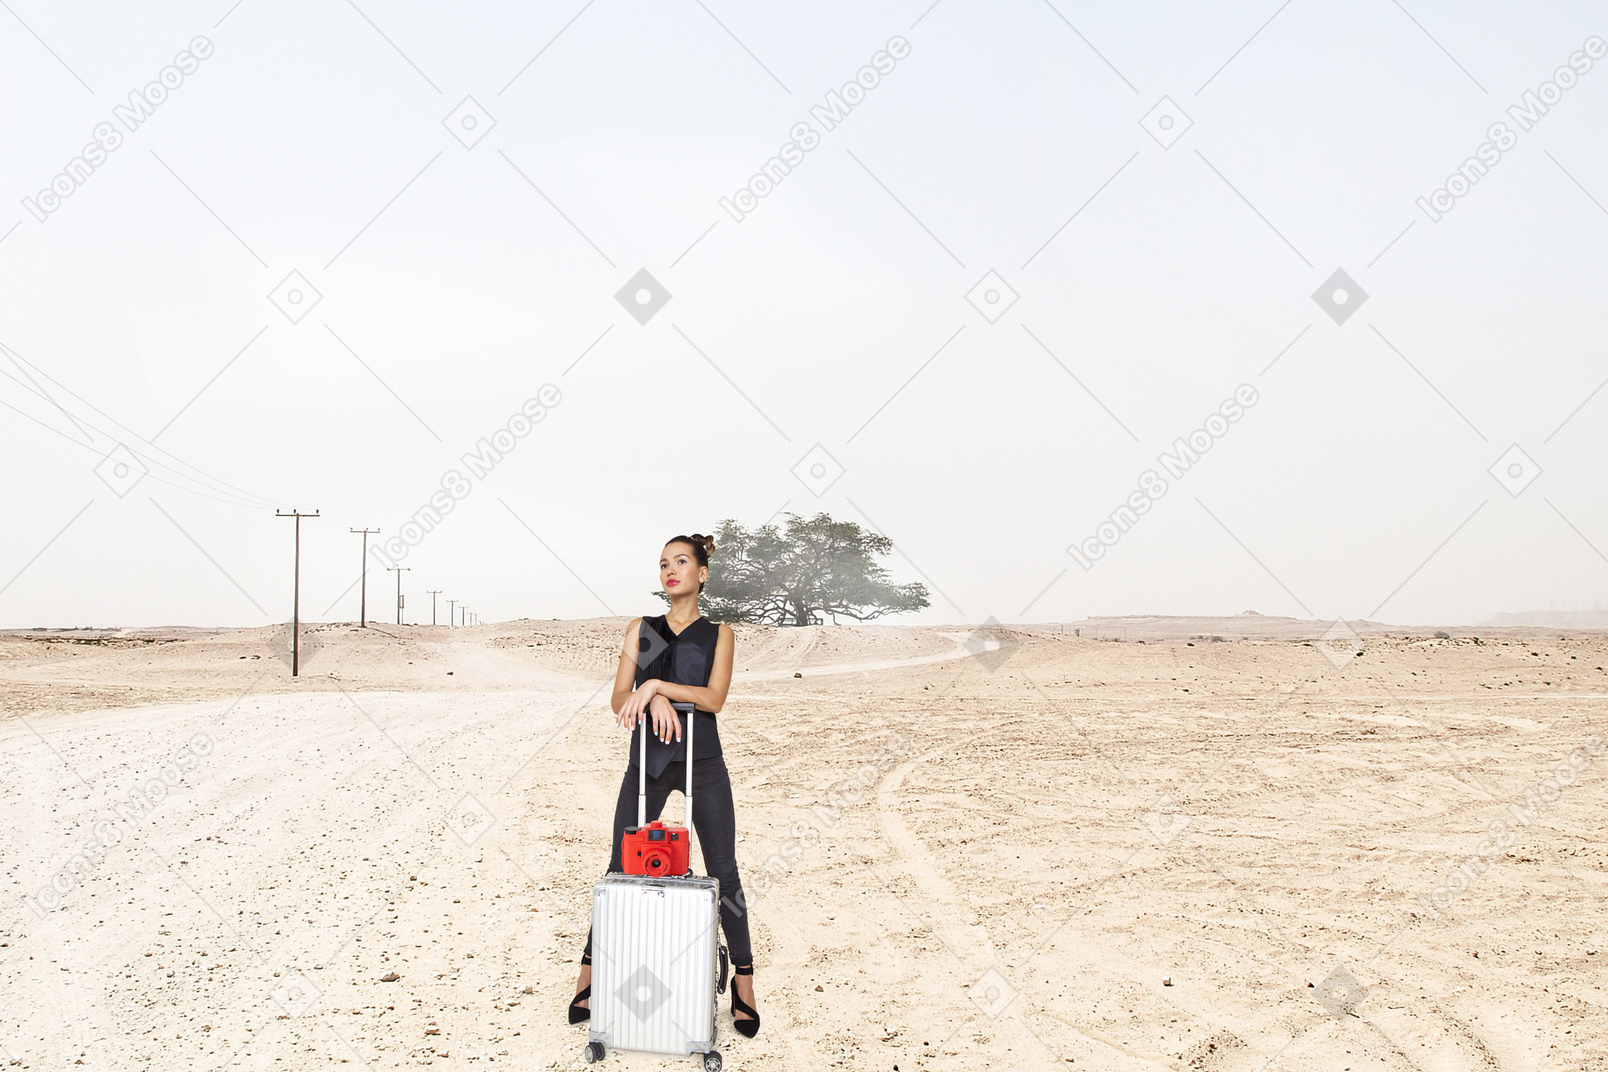 Woman standing with a suitcase in the desert